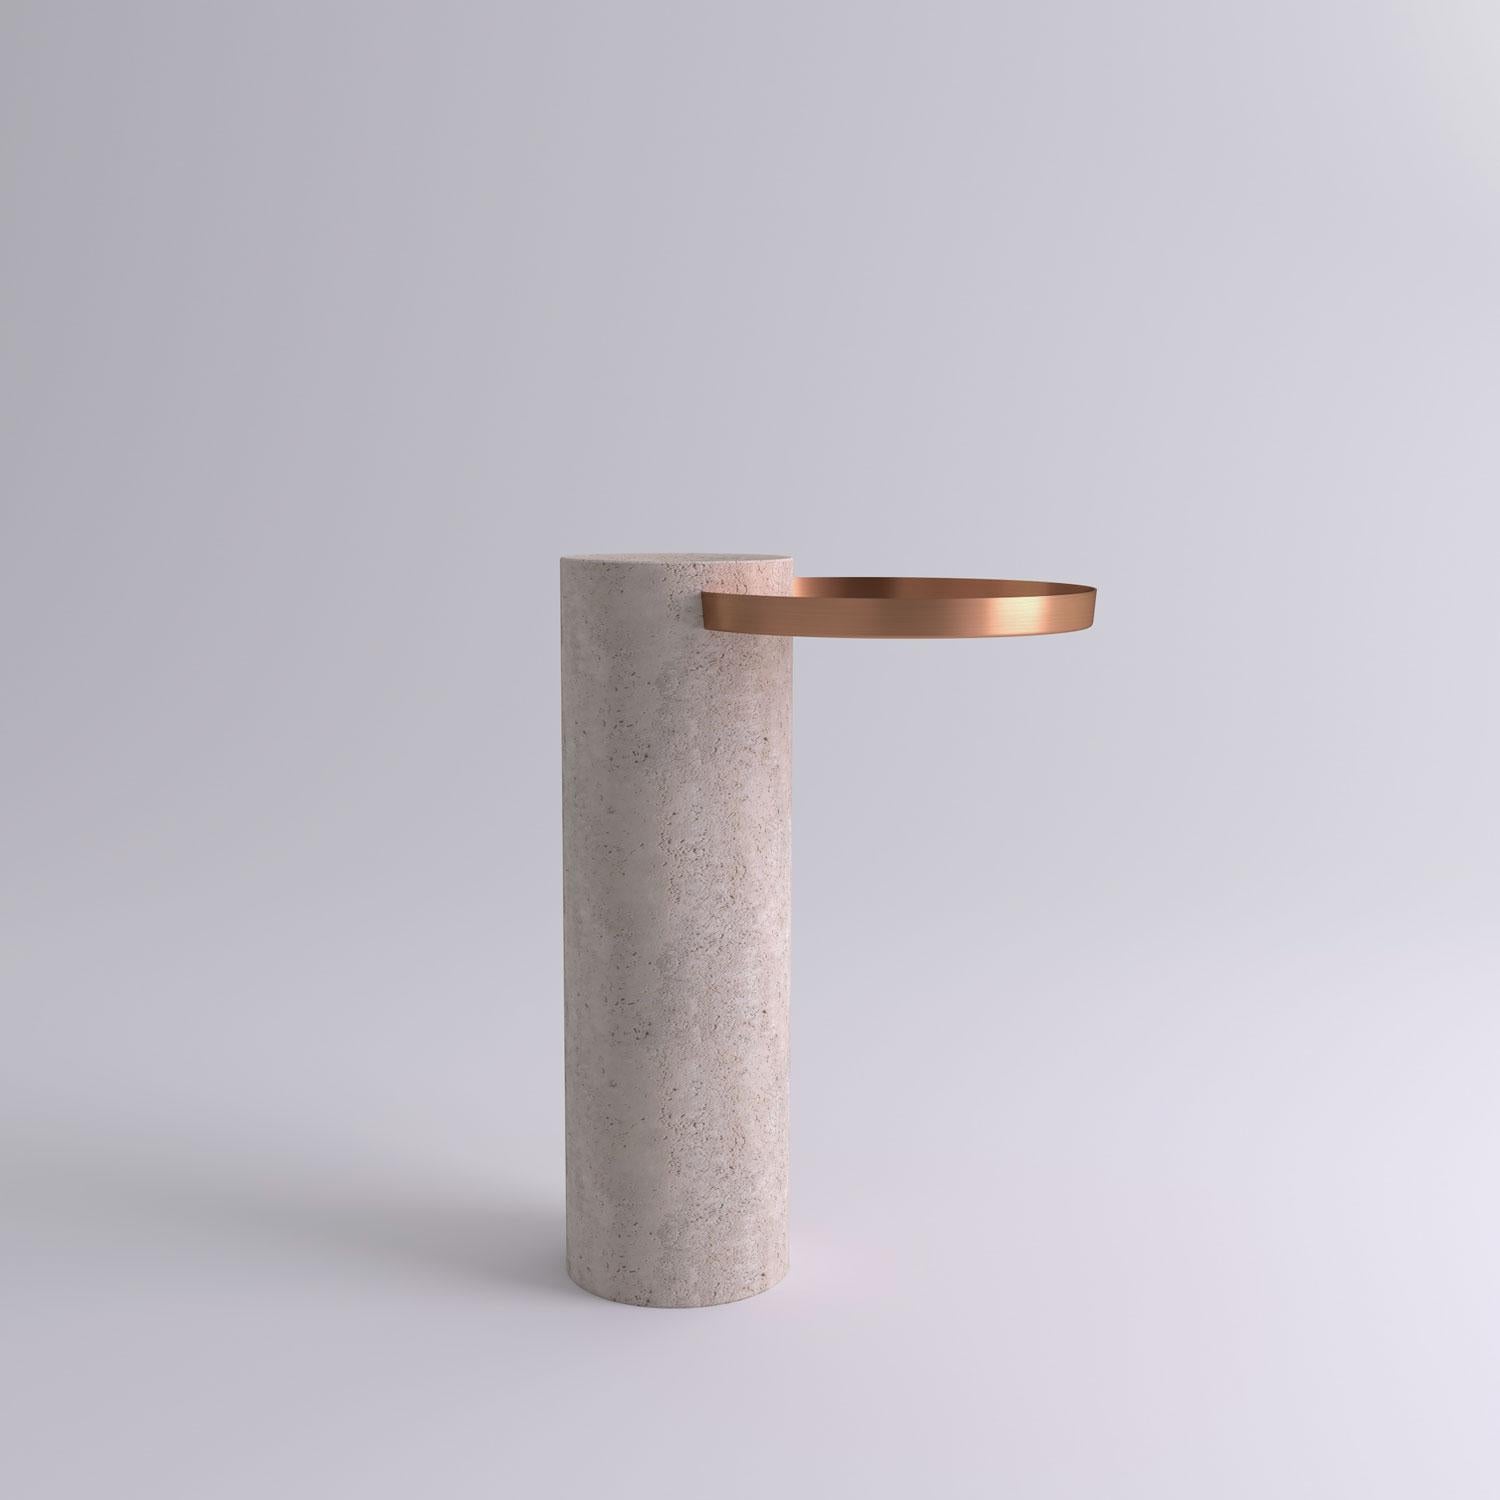 High travertine contemporary guéridon, Sebastian Herkner
Dimensions: D 42 x H 57 cm
Materials: Travertine stone, copper

The salute table exists in 3 sizes, 4 different marble stones for the column and 5 different finishes for the tray for a